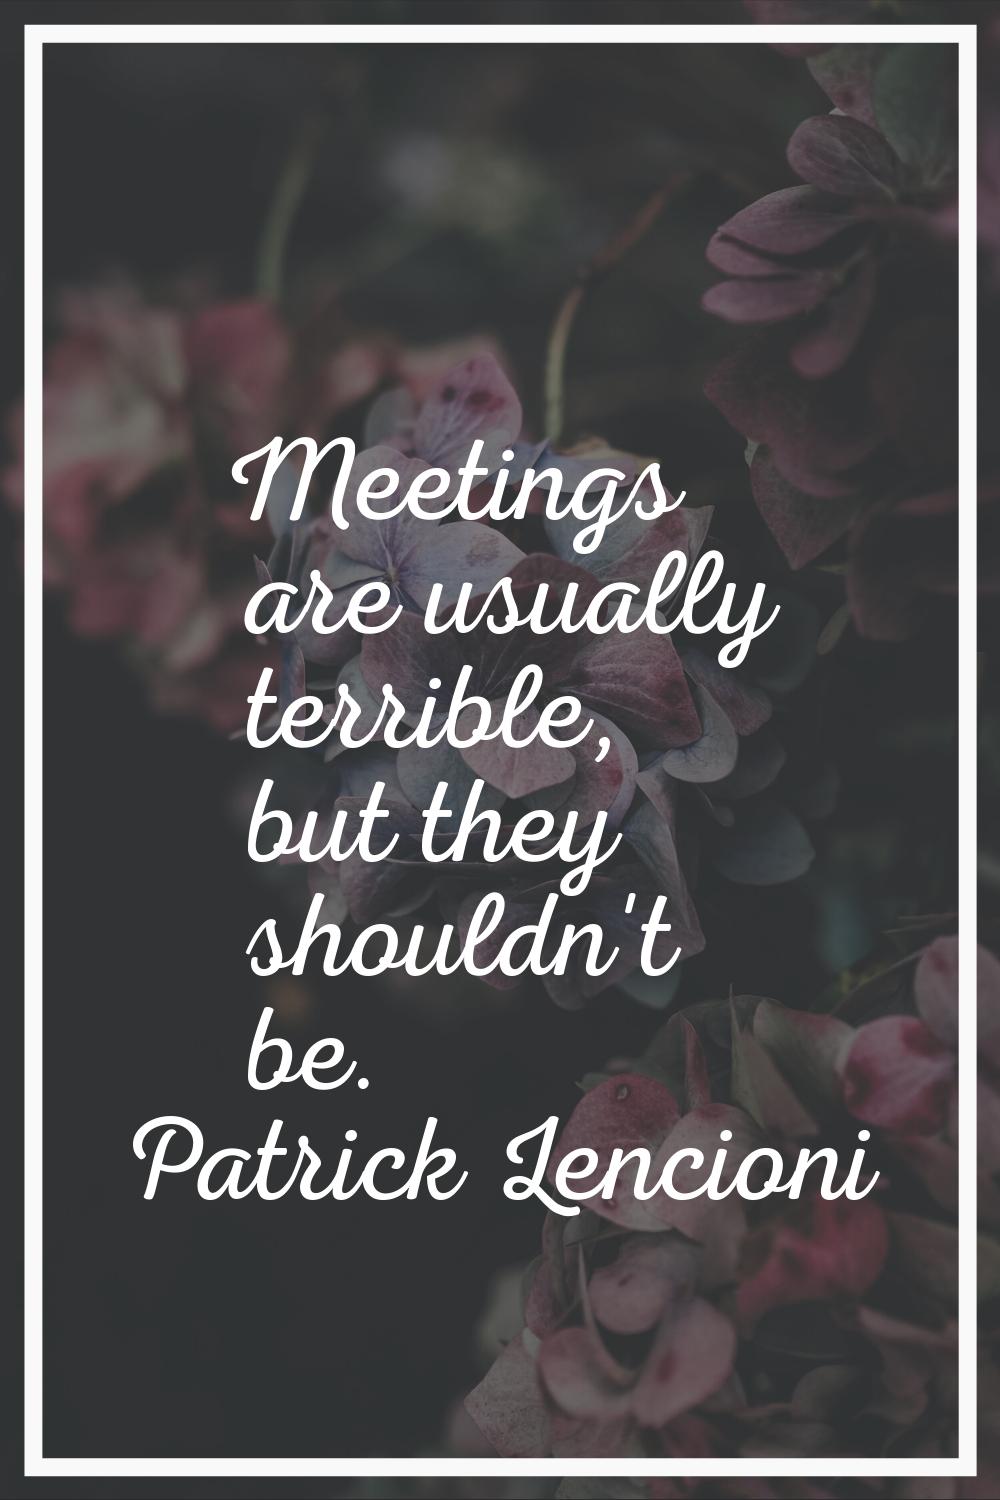 Meetings are usually terrible, but they shouldn't be.